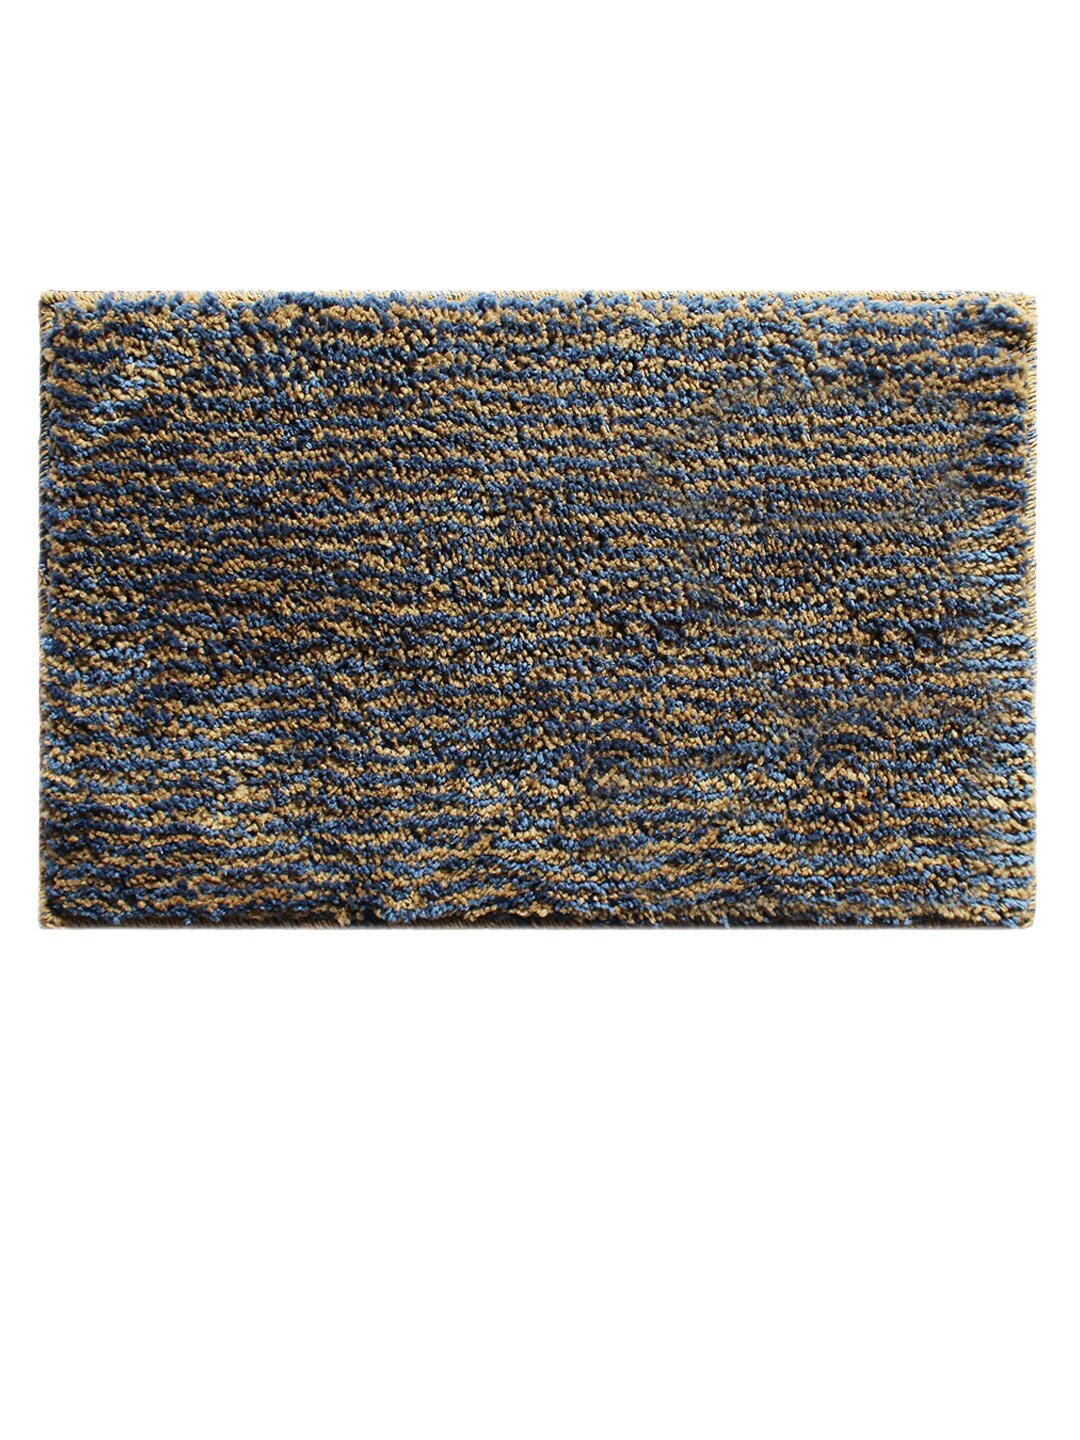 LUXEHOME INTERNATIONAL Blue & Beige 2800 GSM Bath Rug Price in India